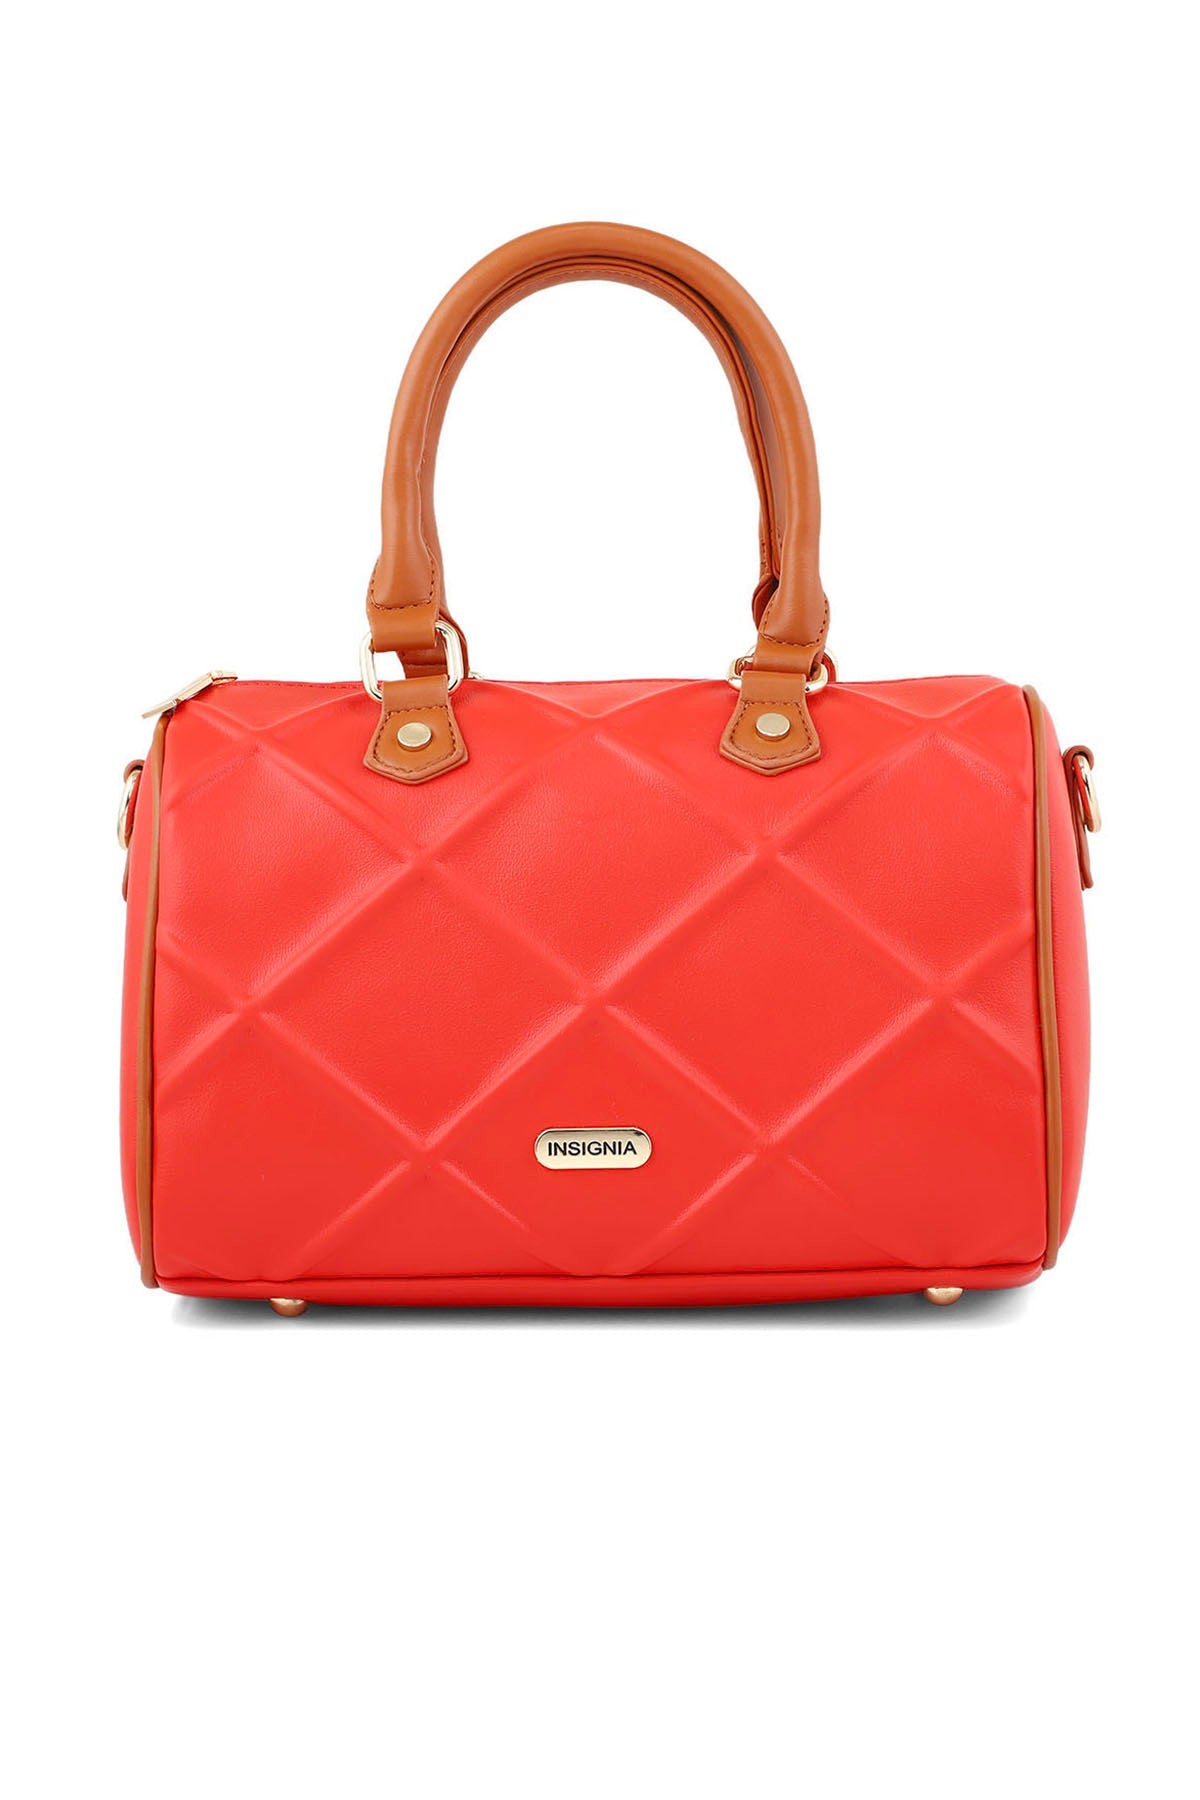 Top Handle Hand Bags B15041-Red